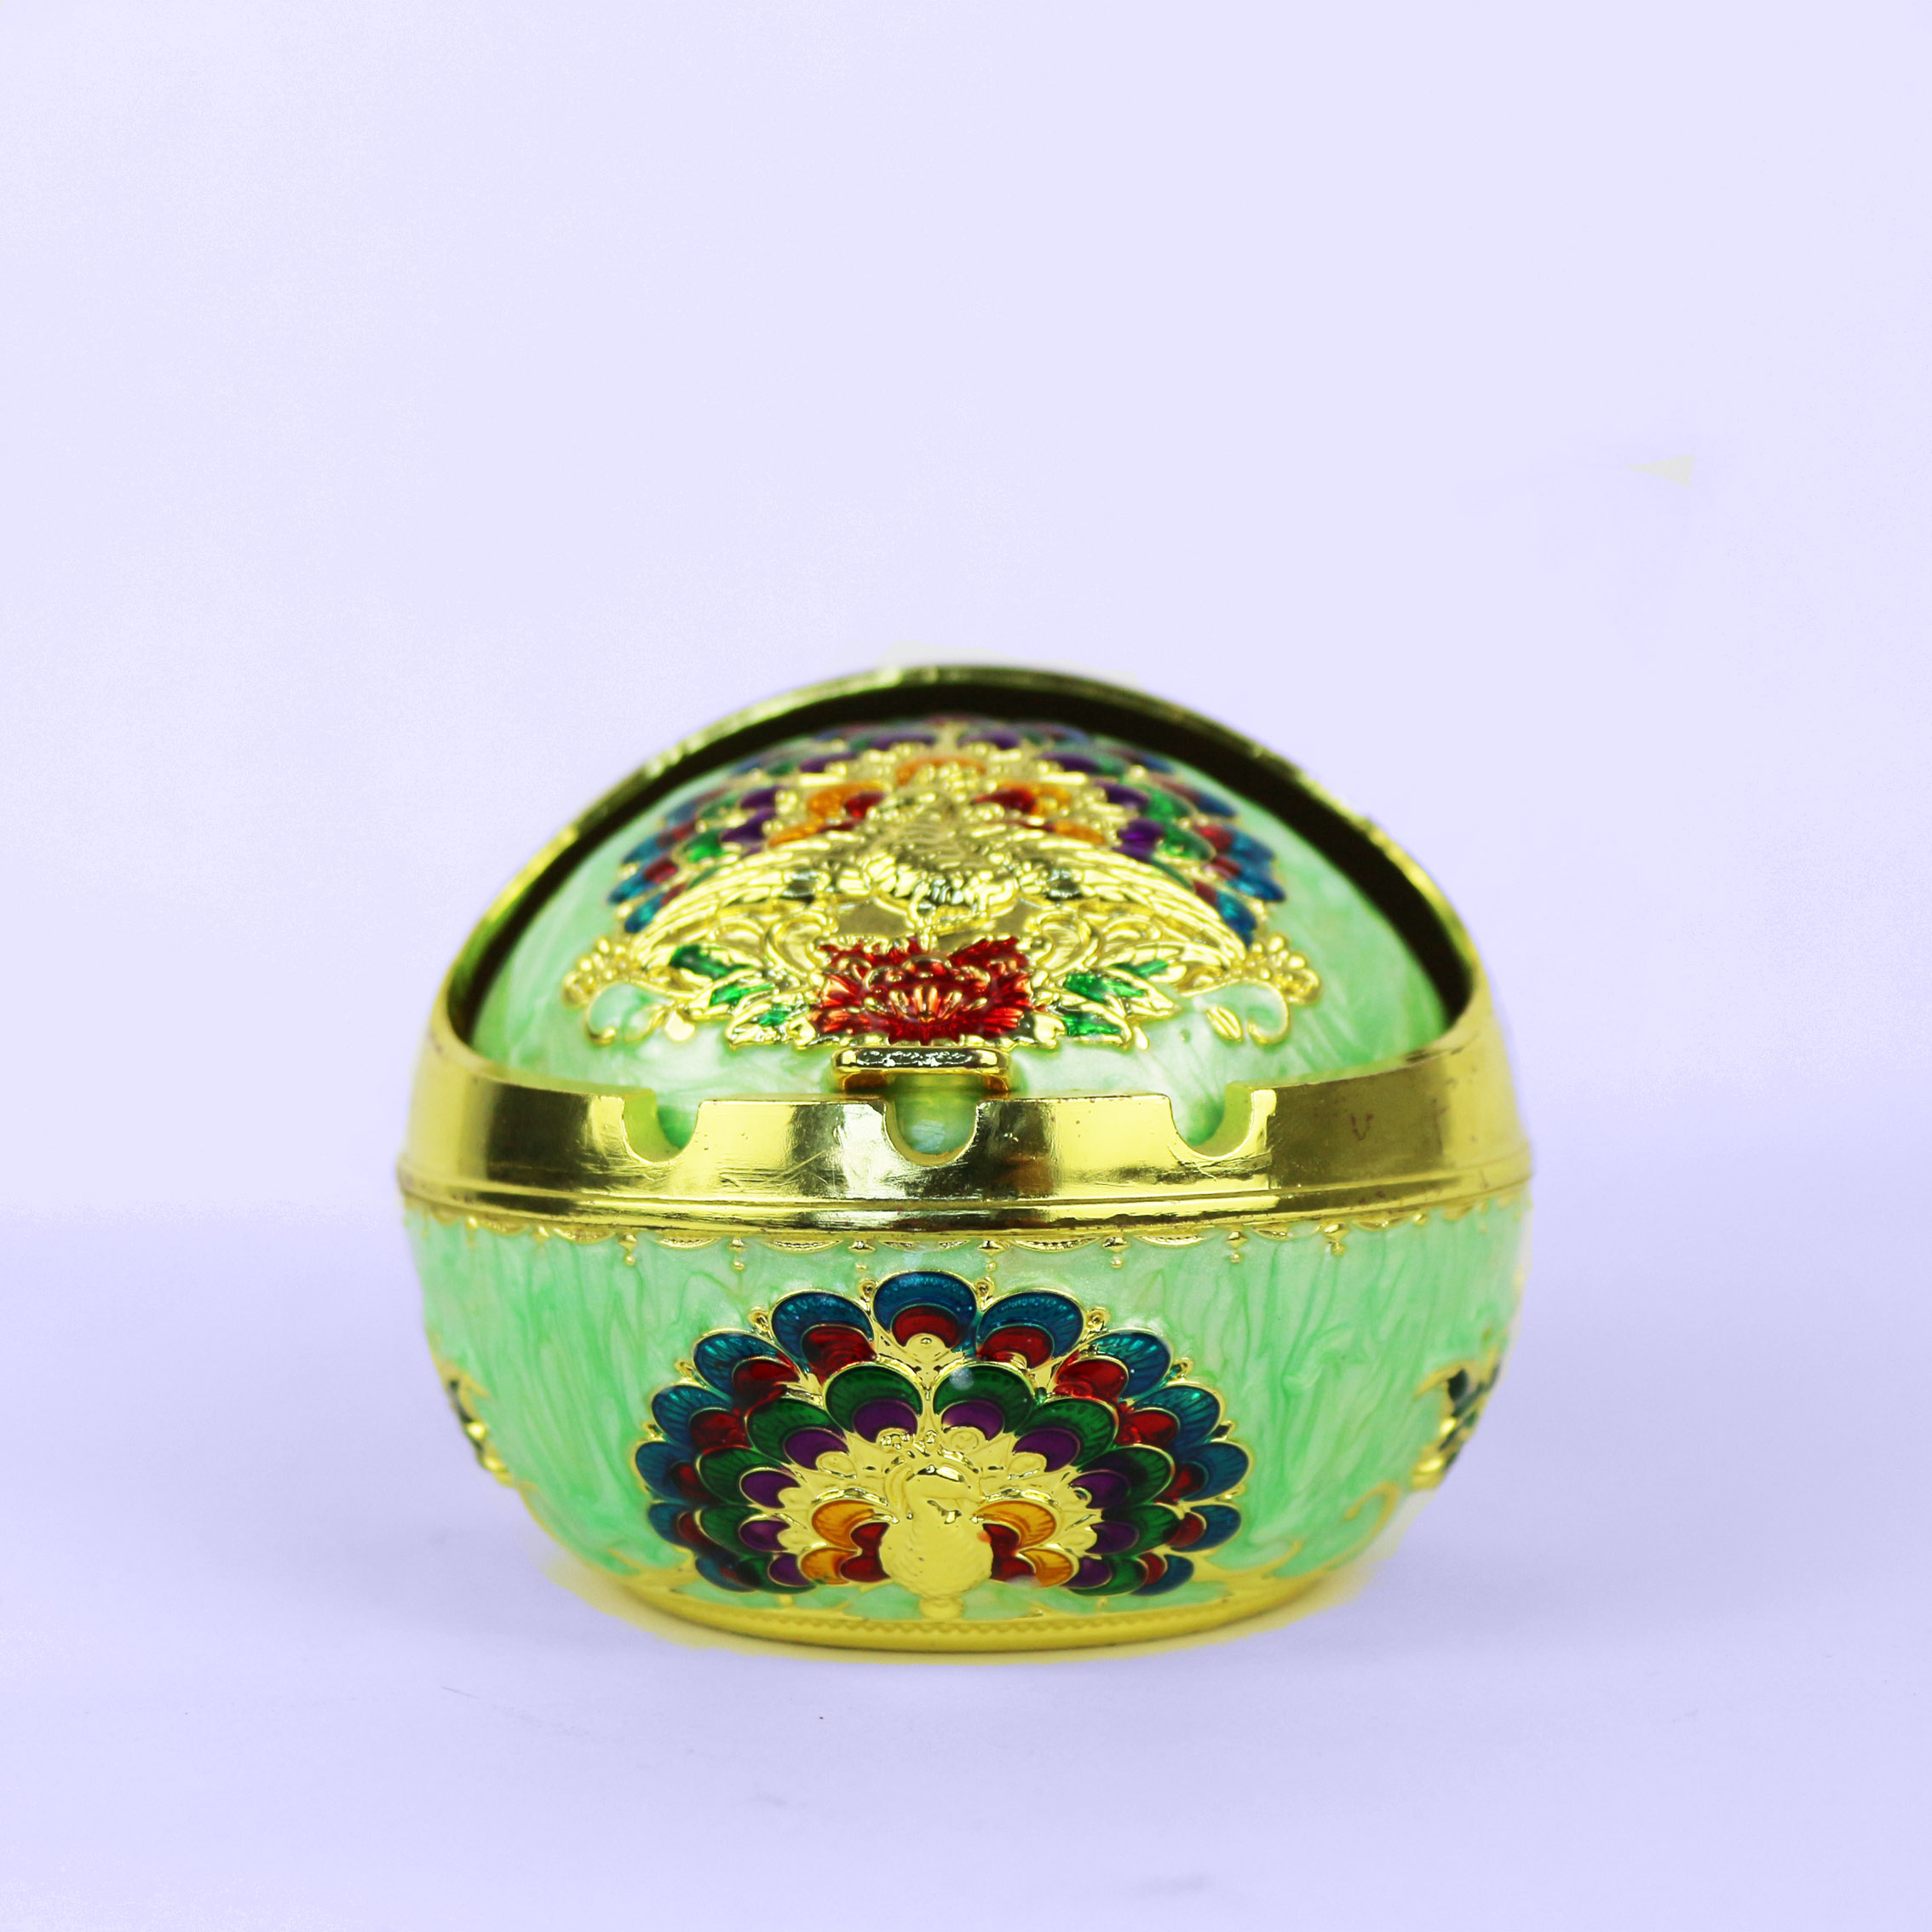 Gold and green vintage peacock ashtray